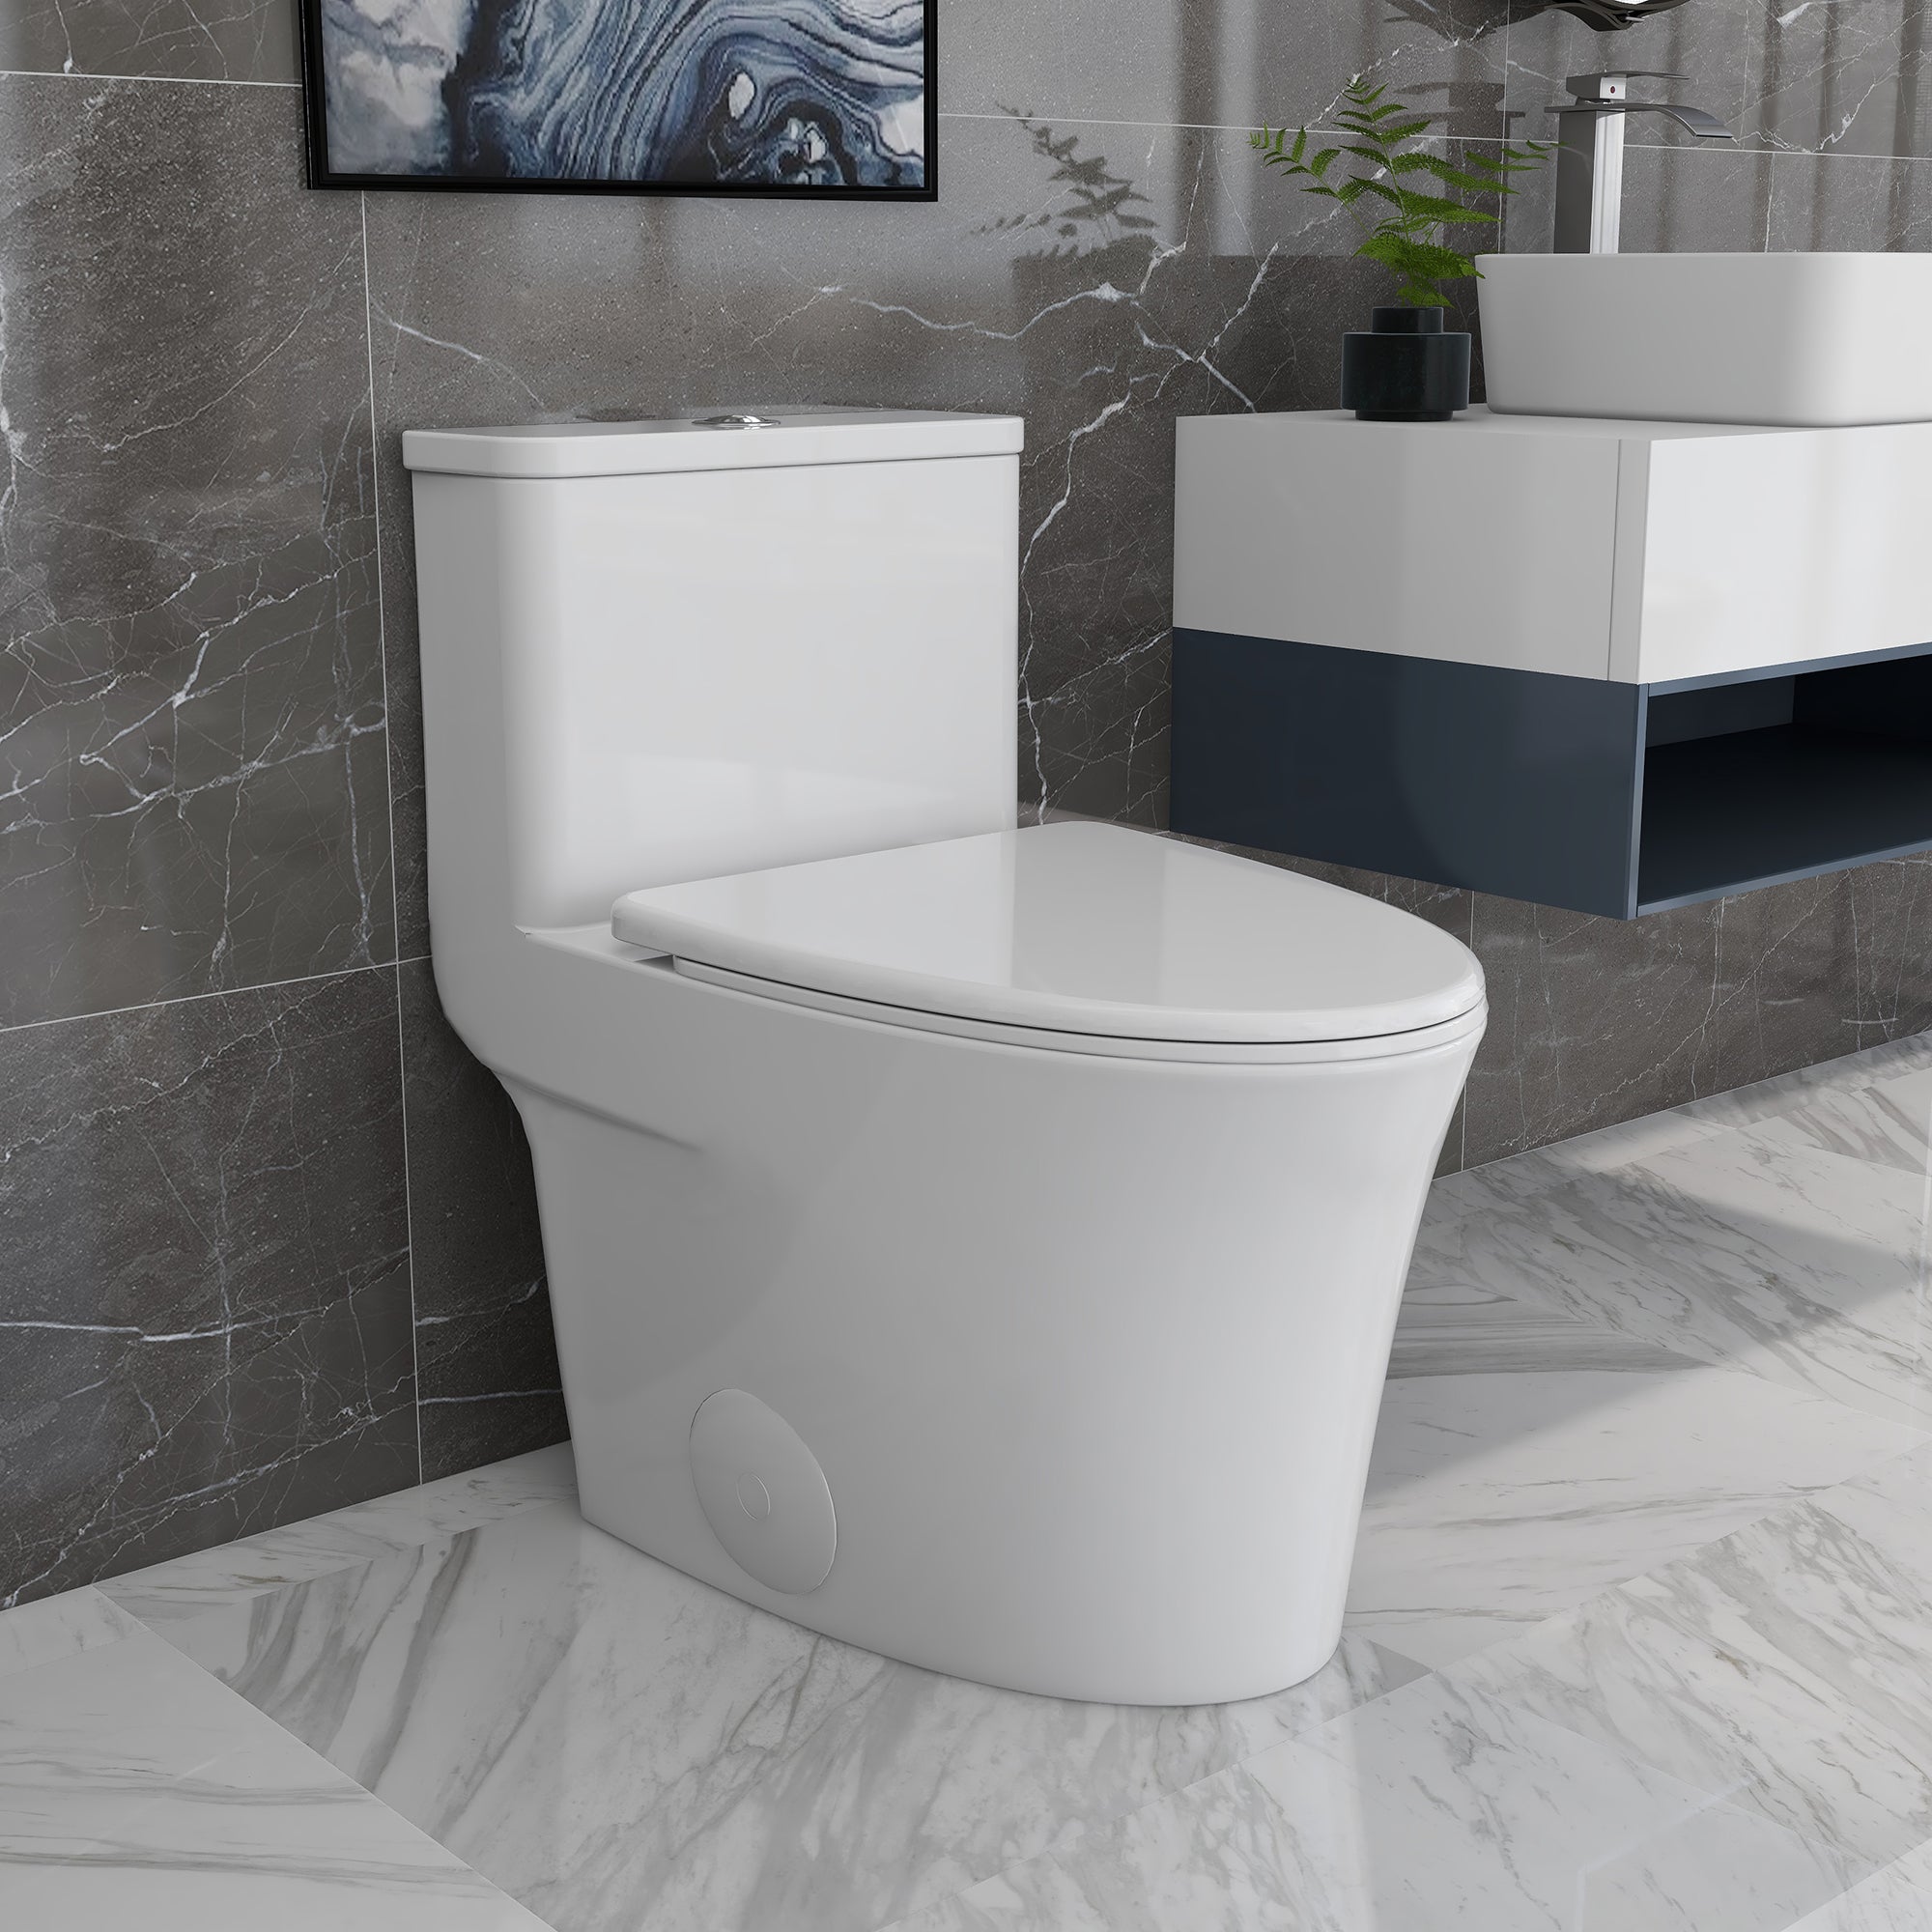 DeerValley DV-1F52807 Symmetry 1.28 GPF Elongated One-Piece Toilet (Seat Included)